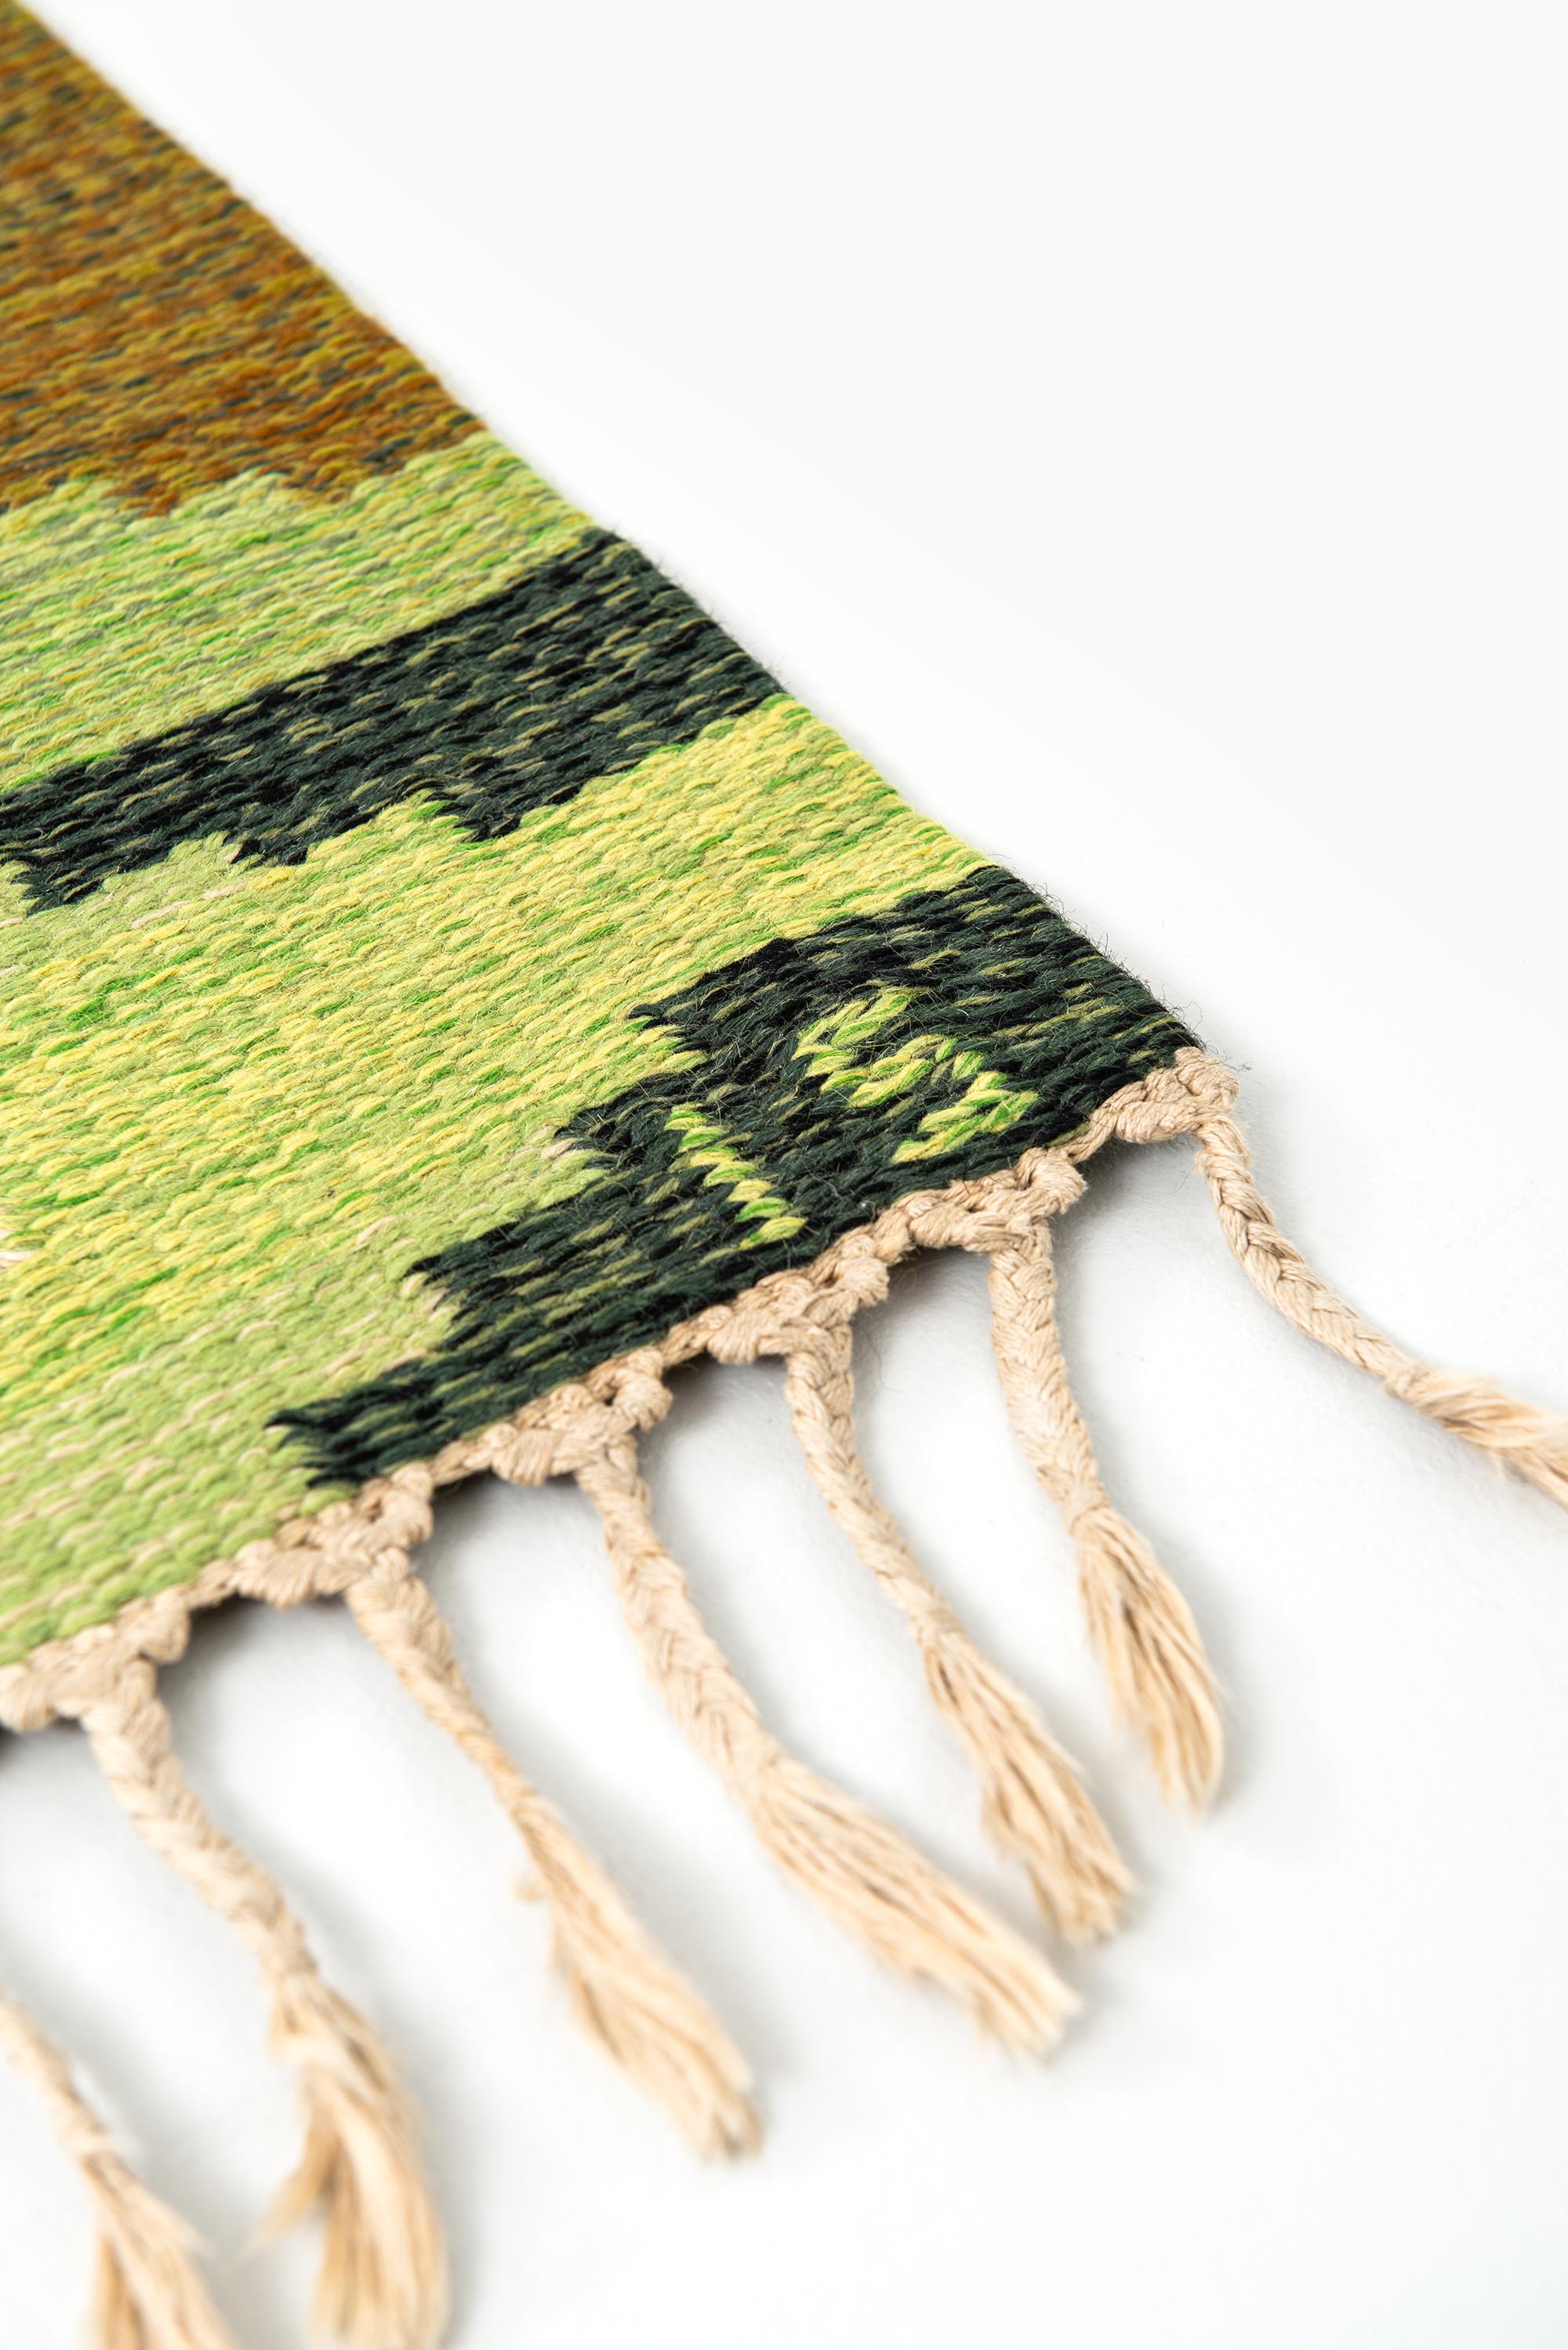 Mid-20th Century Ingegerd Silow Carpet Produced in Sweden For Sale